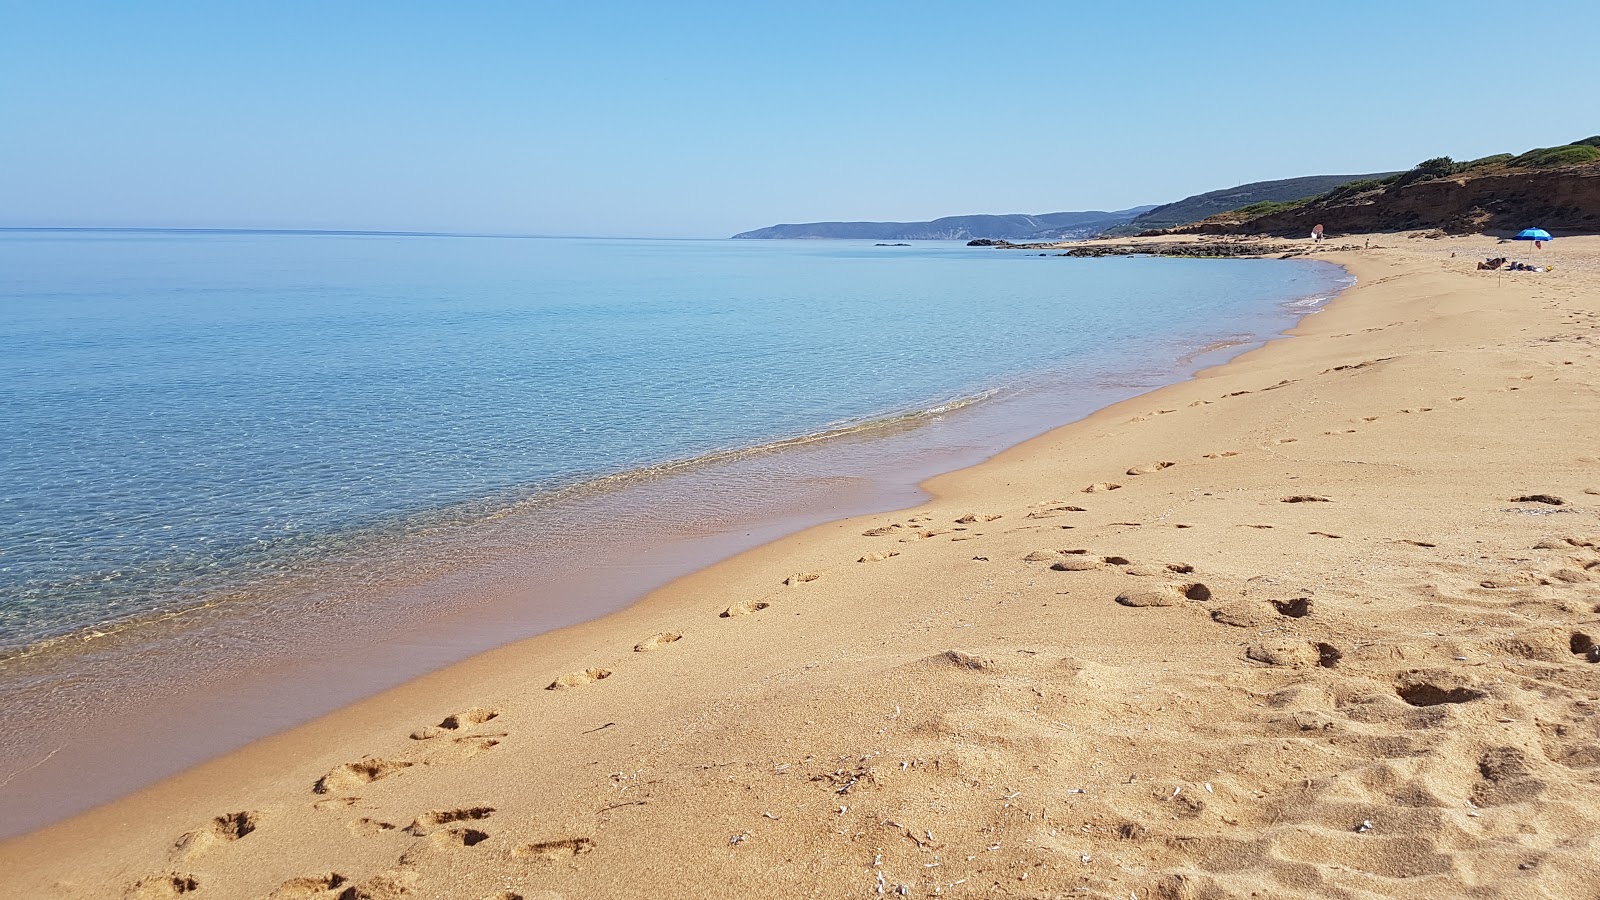 Photo of S'acquedda beach with bright sand surface